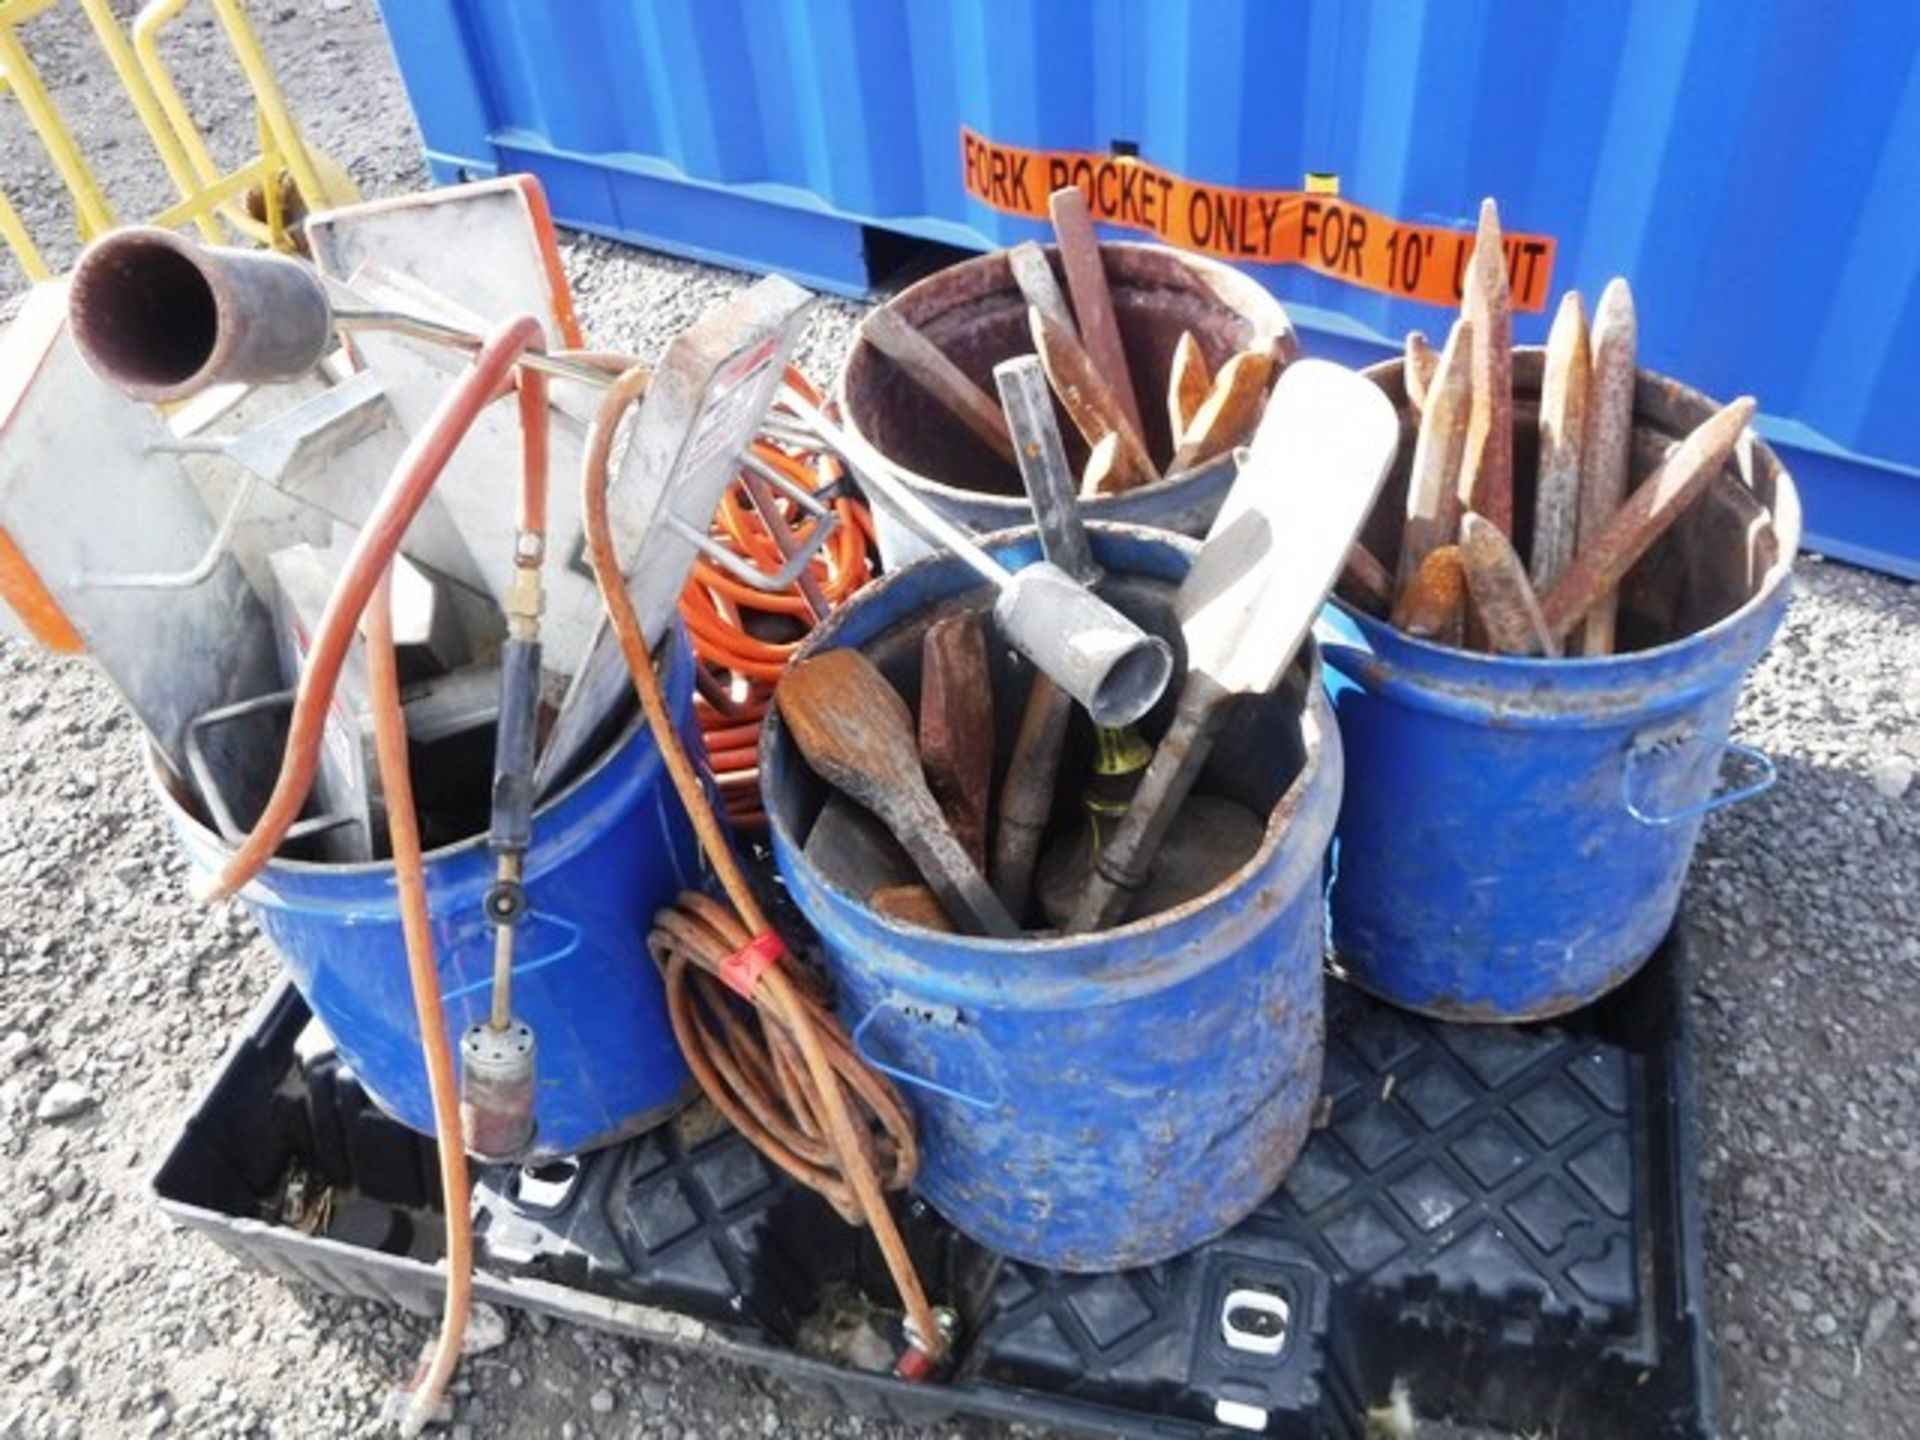 PALLET OF MISCELLANEOUS ITEMS, CHISELS, ELEPHANTS FEET, GAS BURNERS**REPOSSESSED - DIRECT FROM